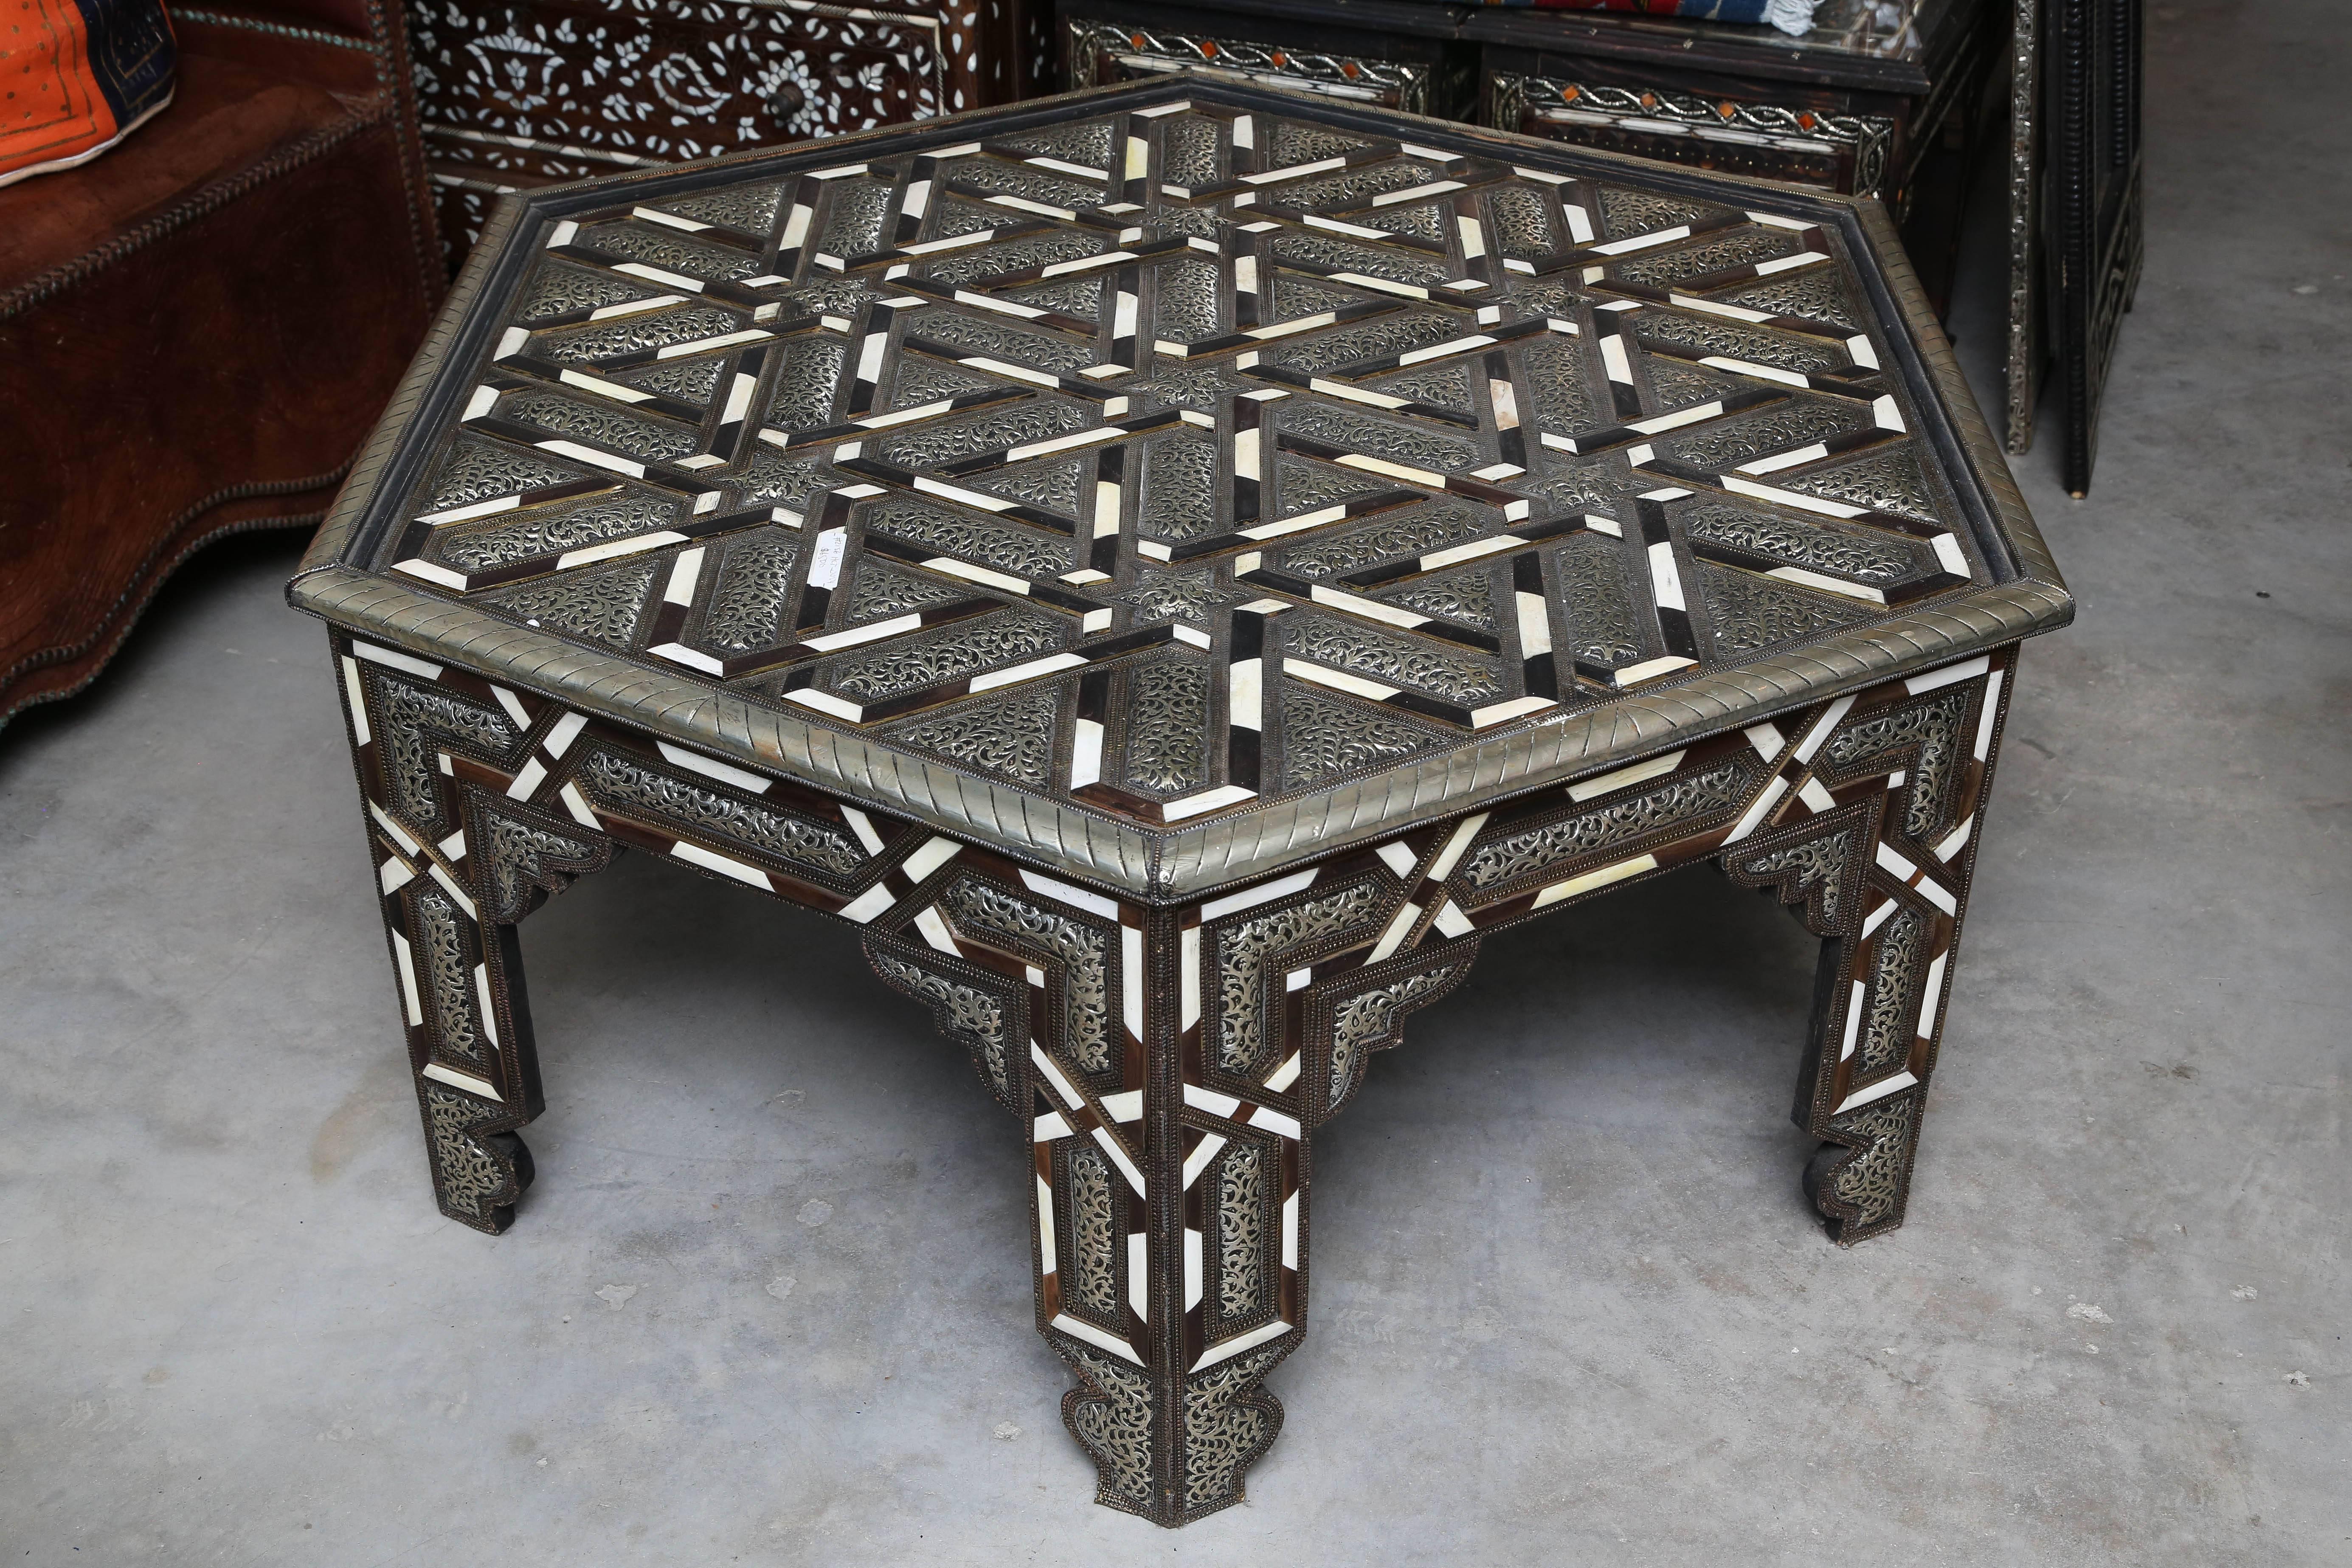 Add an authentic exotic Moroccan and Middle Eastern accent to your home with this hexagon shaped bone, metal and wood inlay coffee table. Beautifully handcrafted in Marrakesh, using traditional craftsmanship and a reference to history.